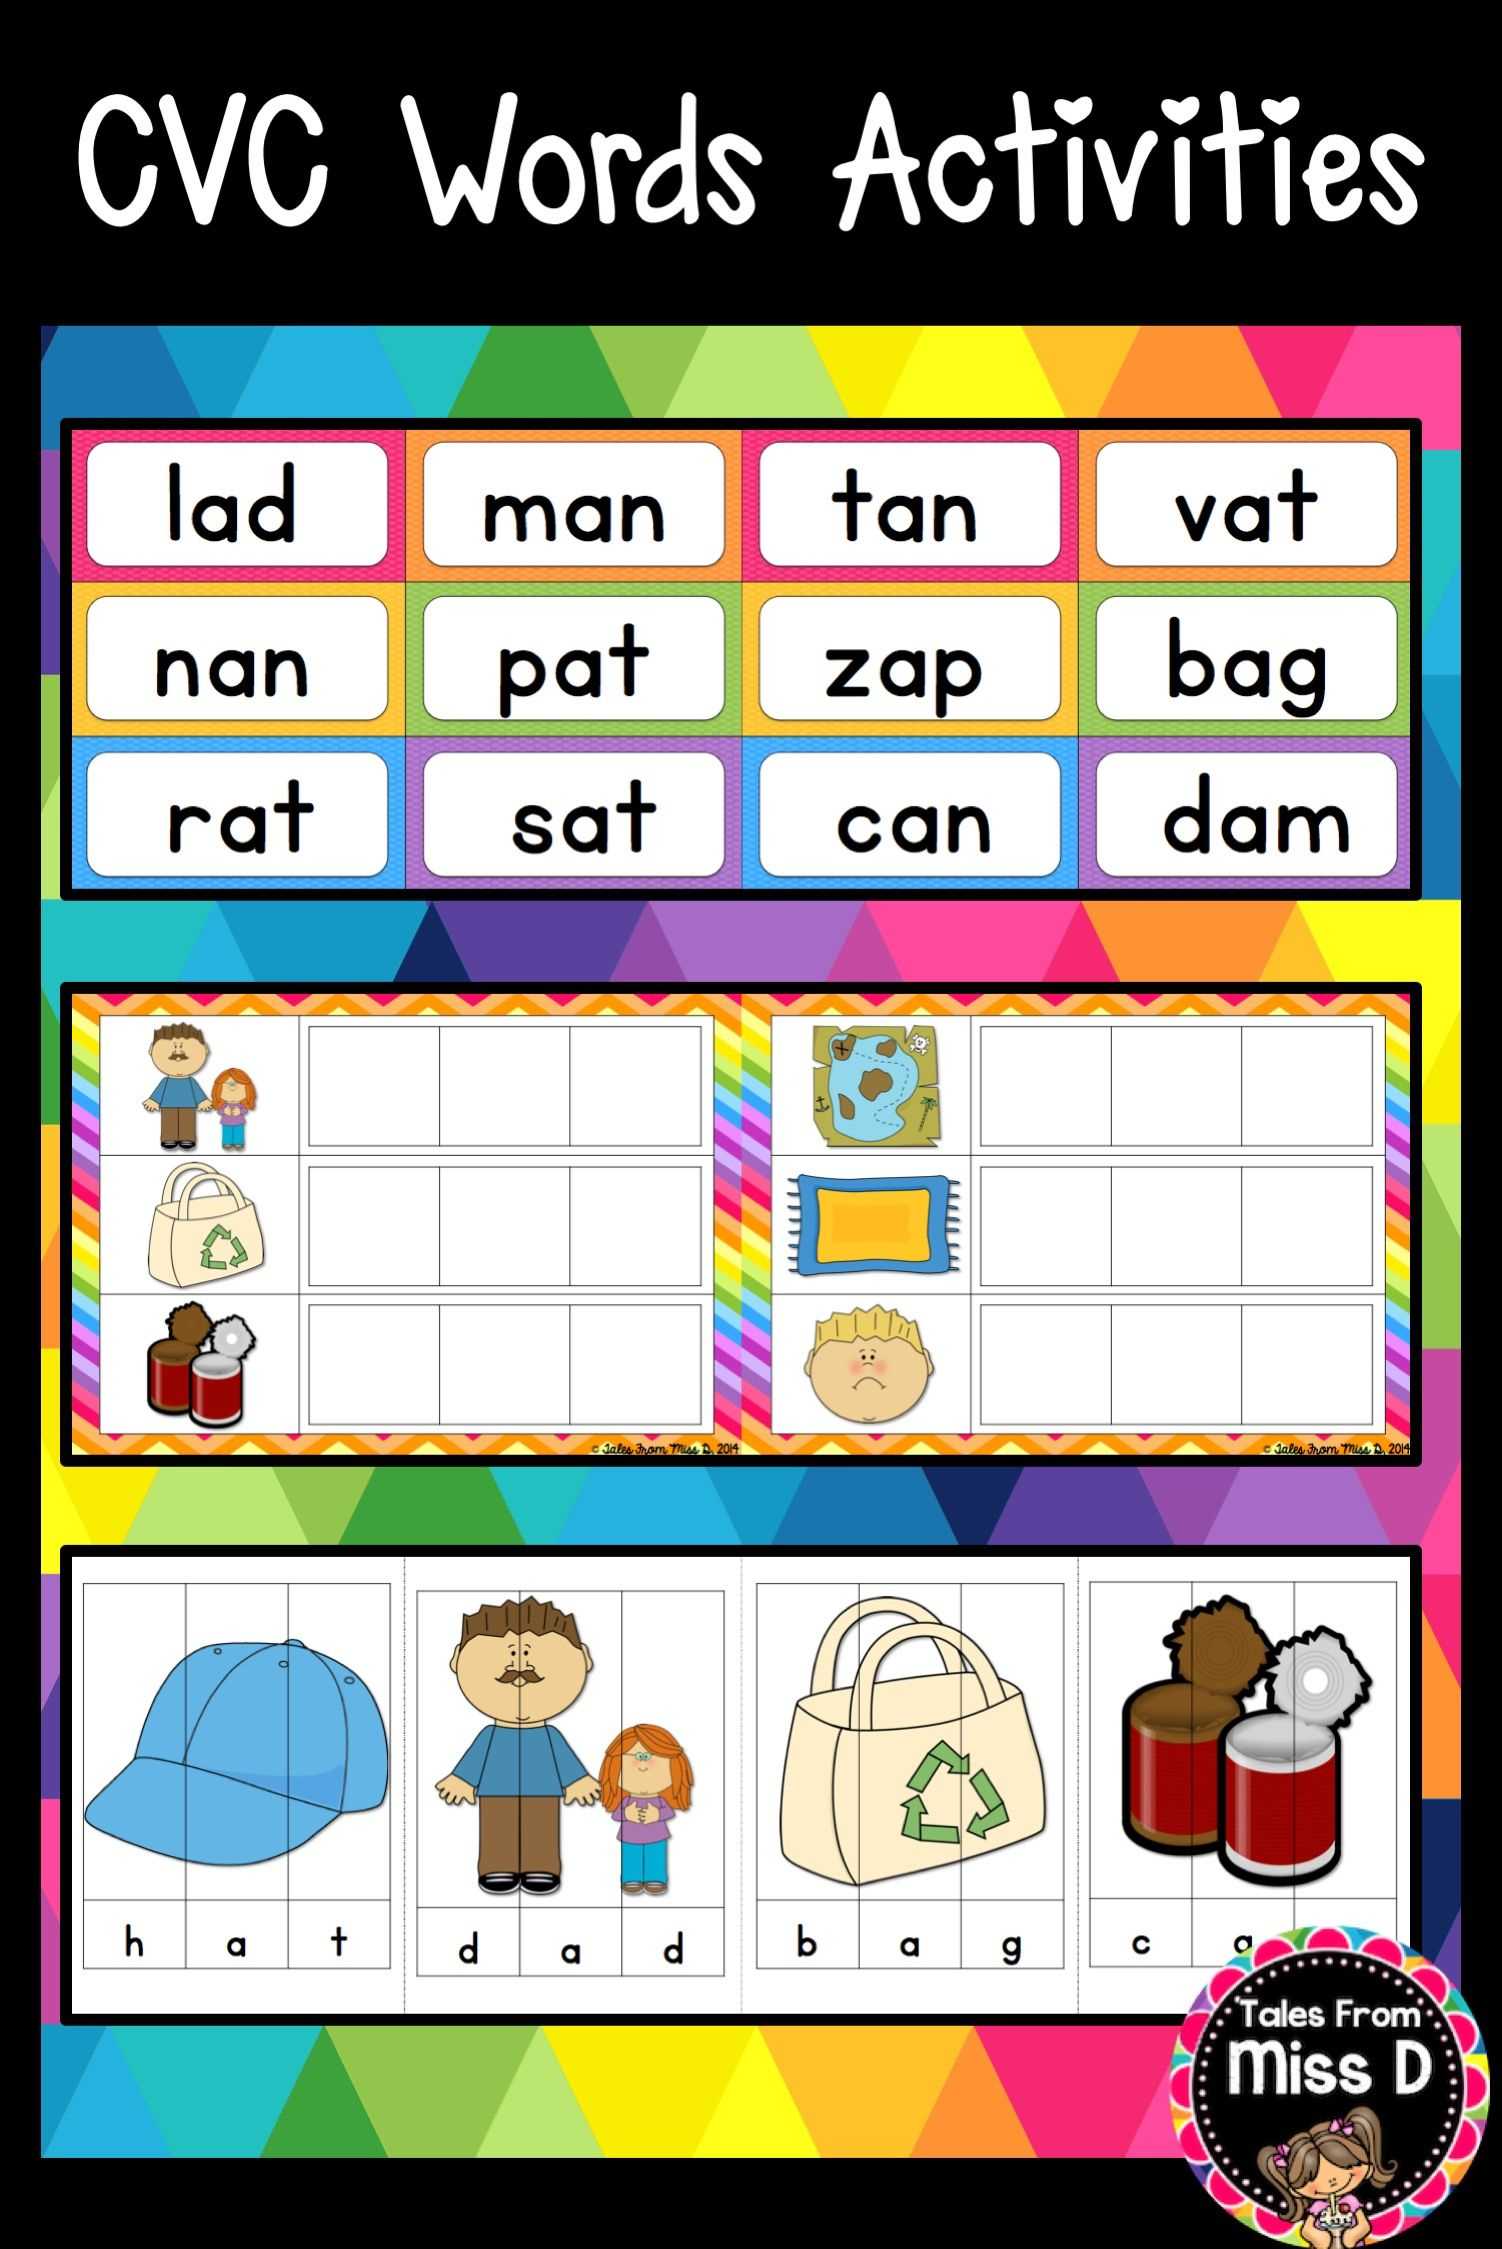 Cvc Words Activities | Education | Cvc Words, Making Words With Making Words Template